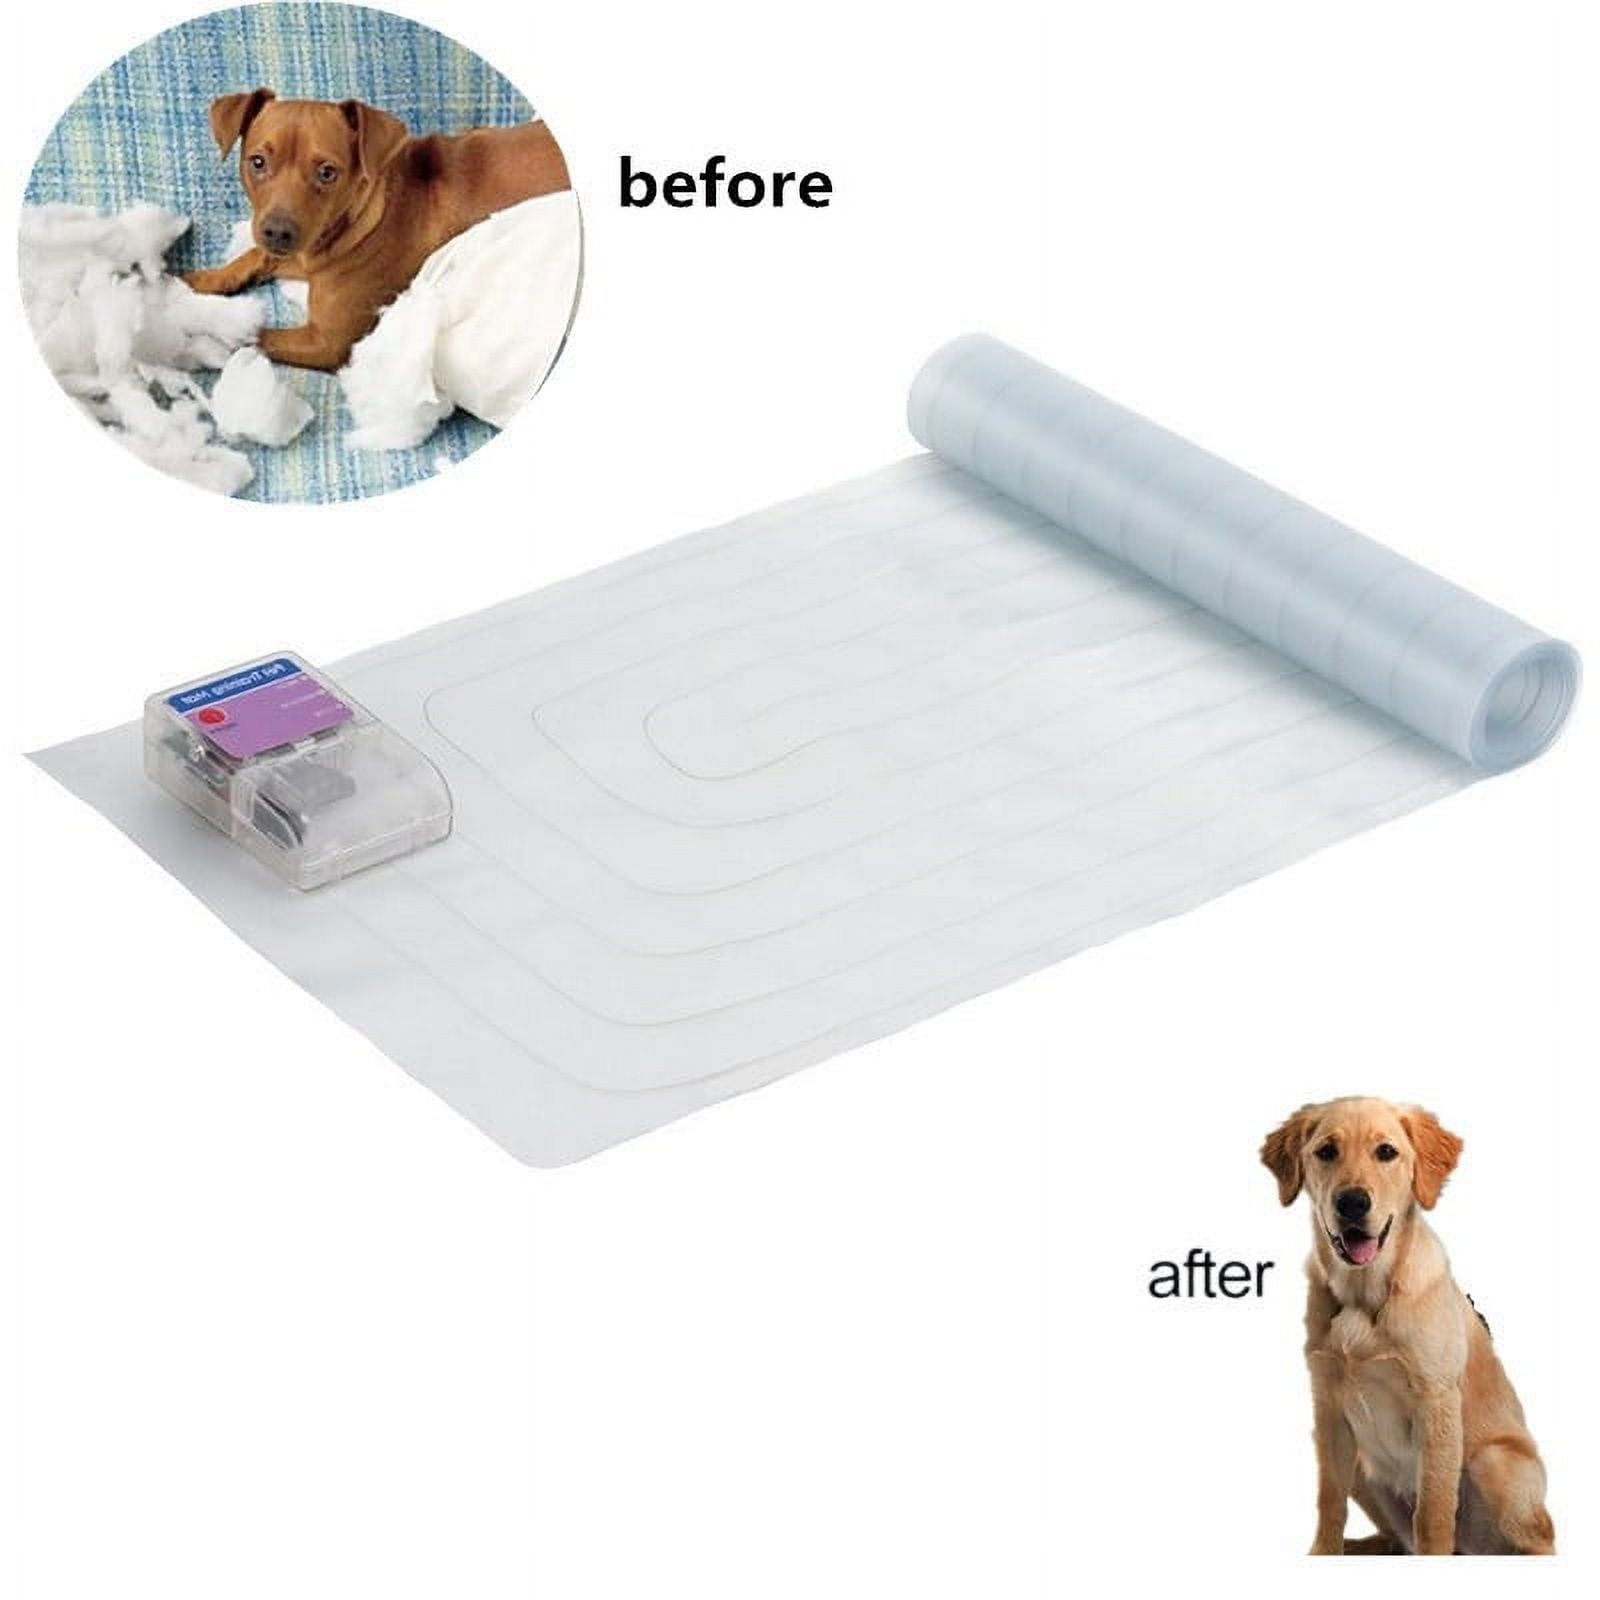 X-MAT Extra Flexible Training Aid Keeps Pets Off Furniture